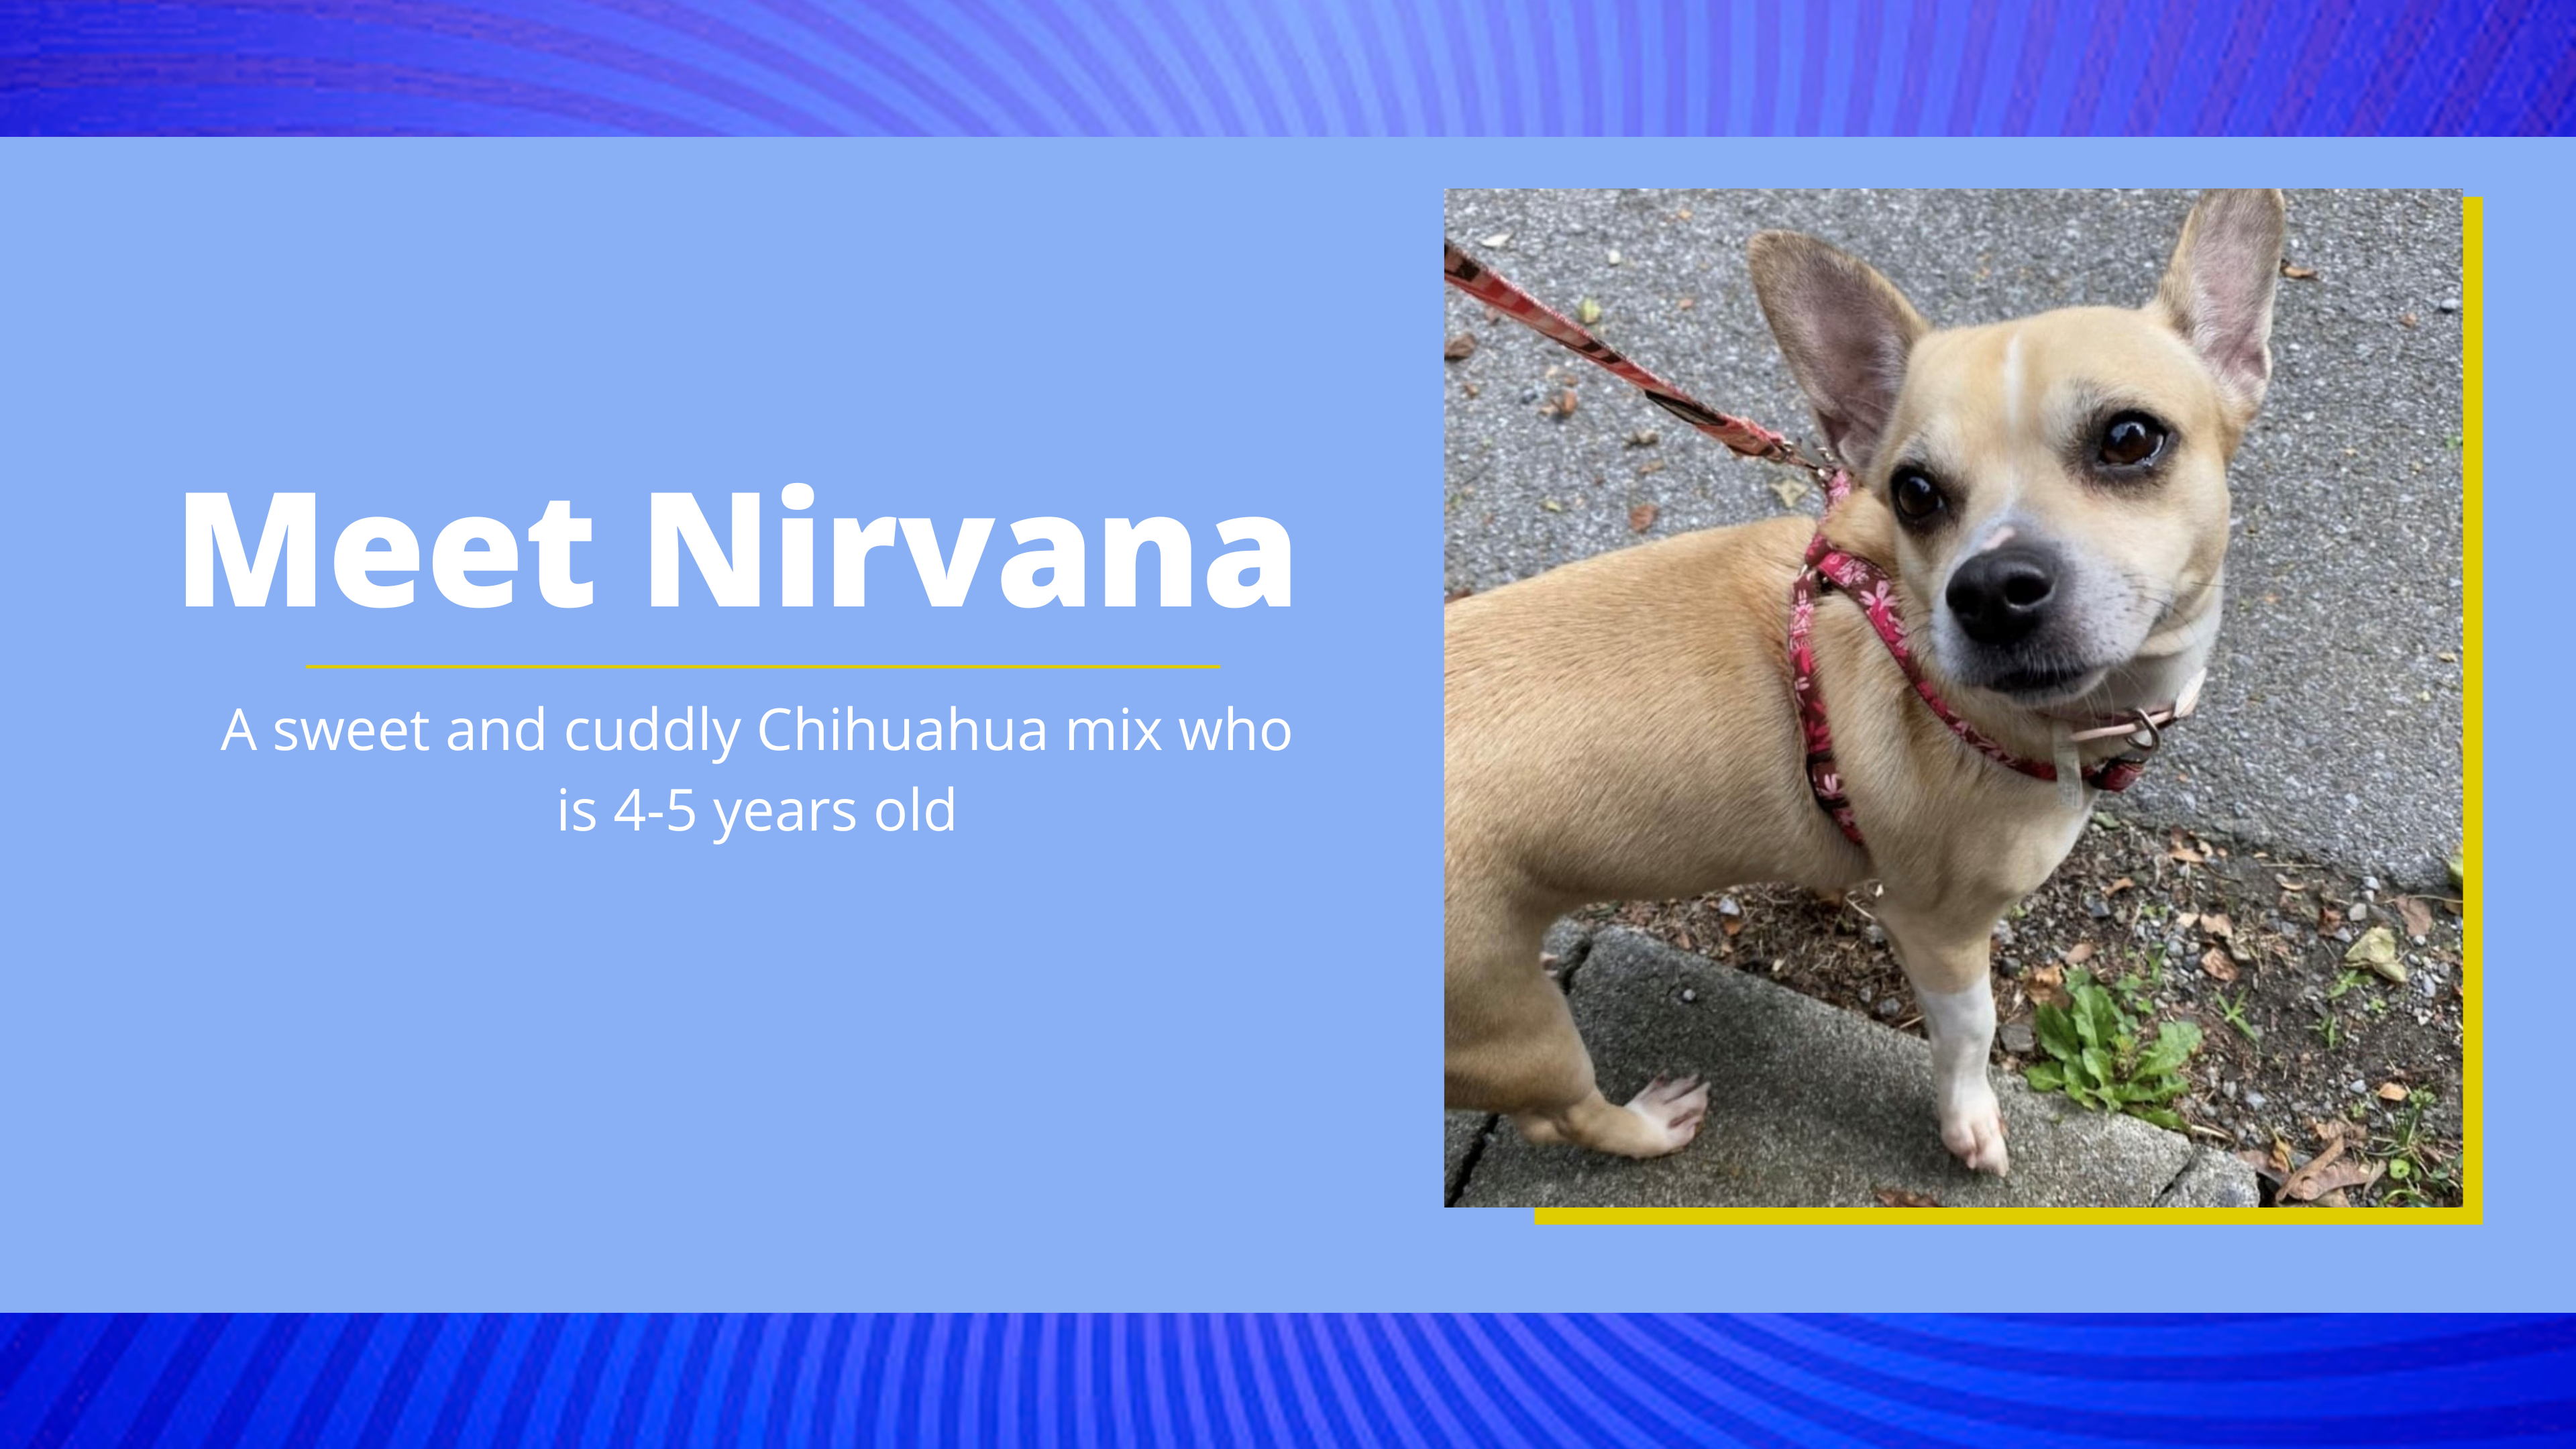 Nirvana is a cuddly chihuahua mix and is available for adoption in Beacon